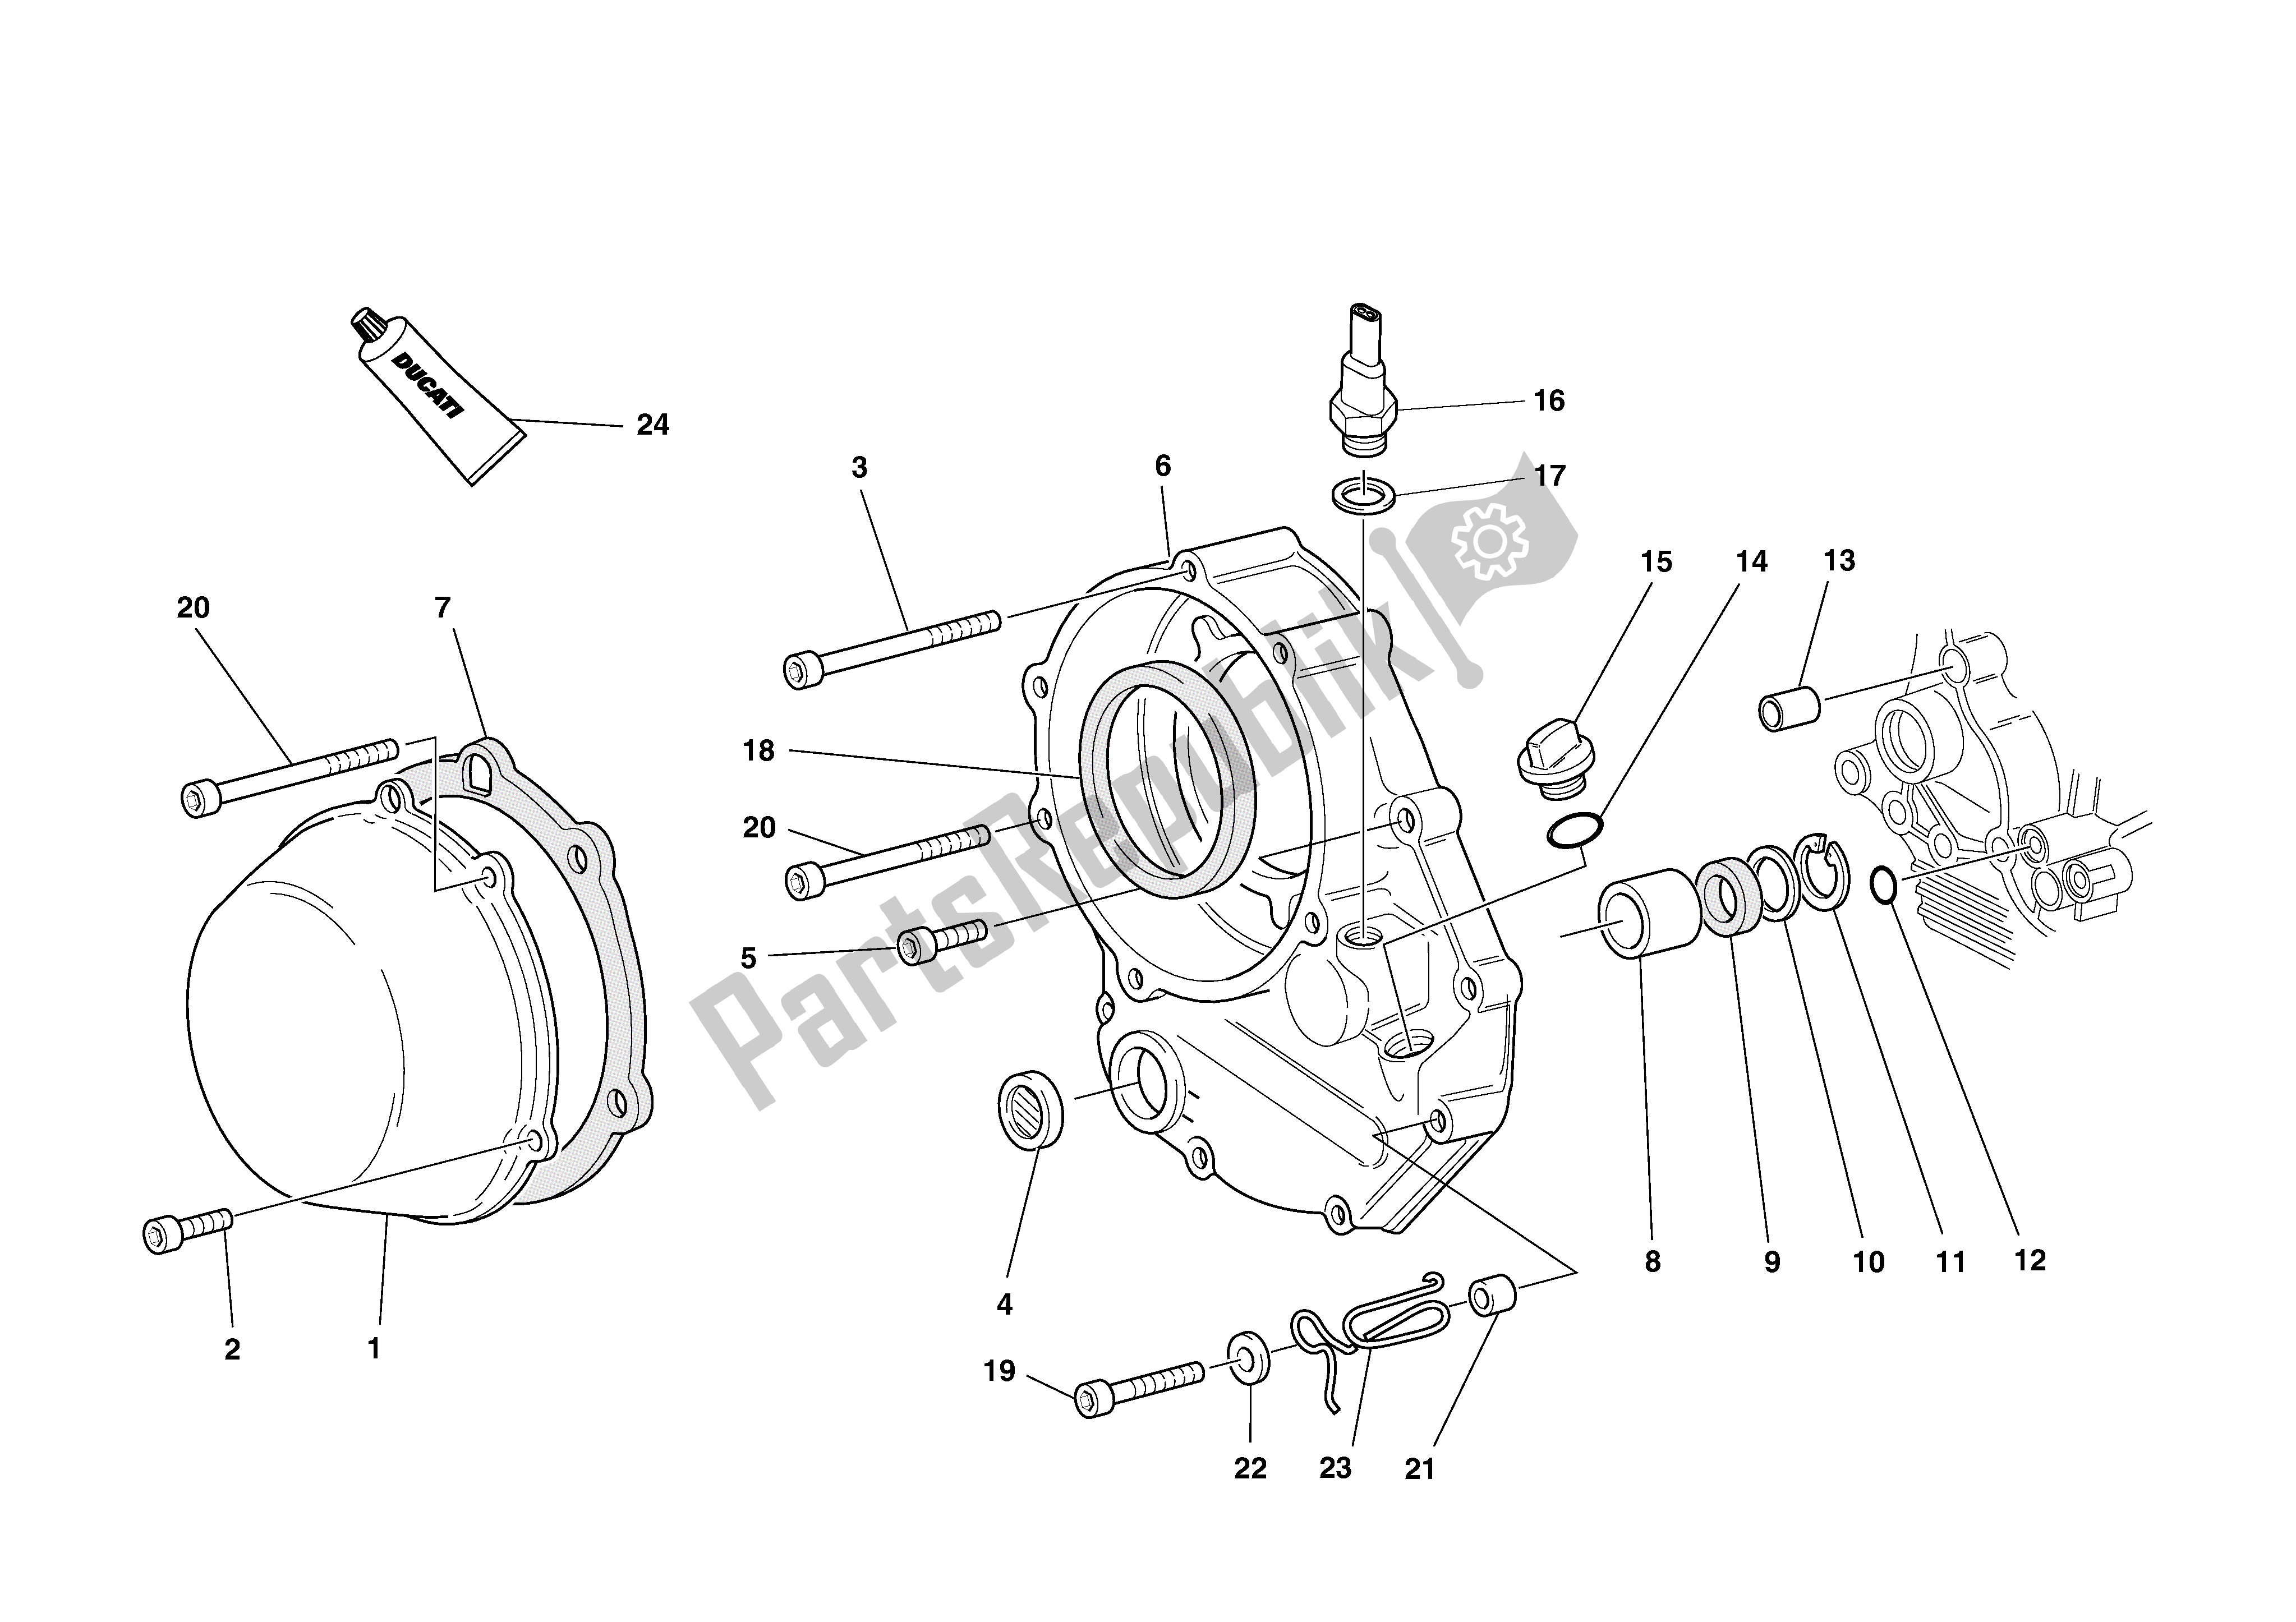 All parts for the Clutch Cover of the Ducati Monster S4 916 2002